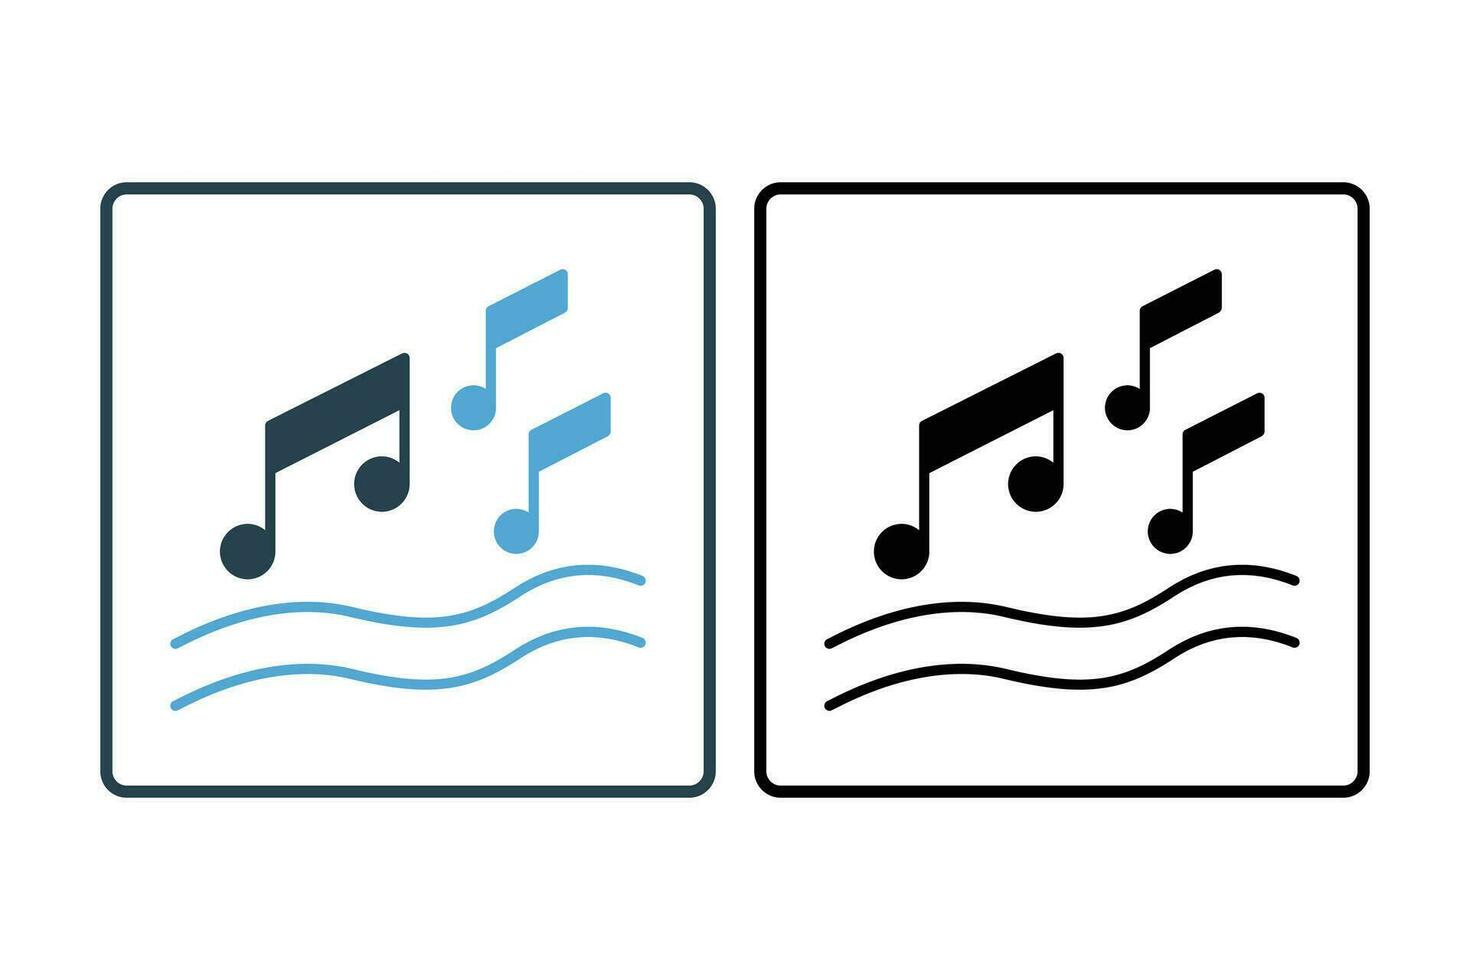 music note icon. icon related to party. solid icon style. simple vector design editable